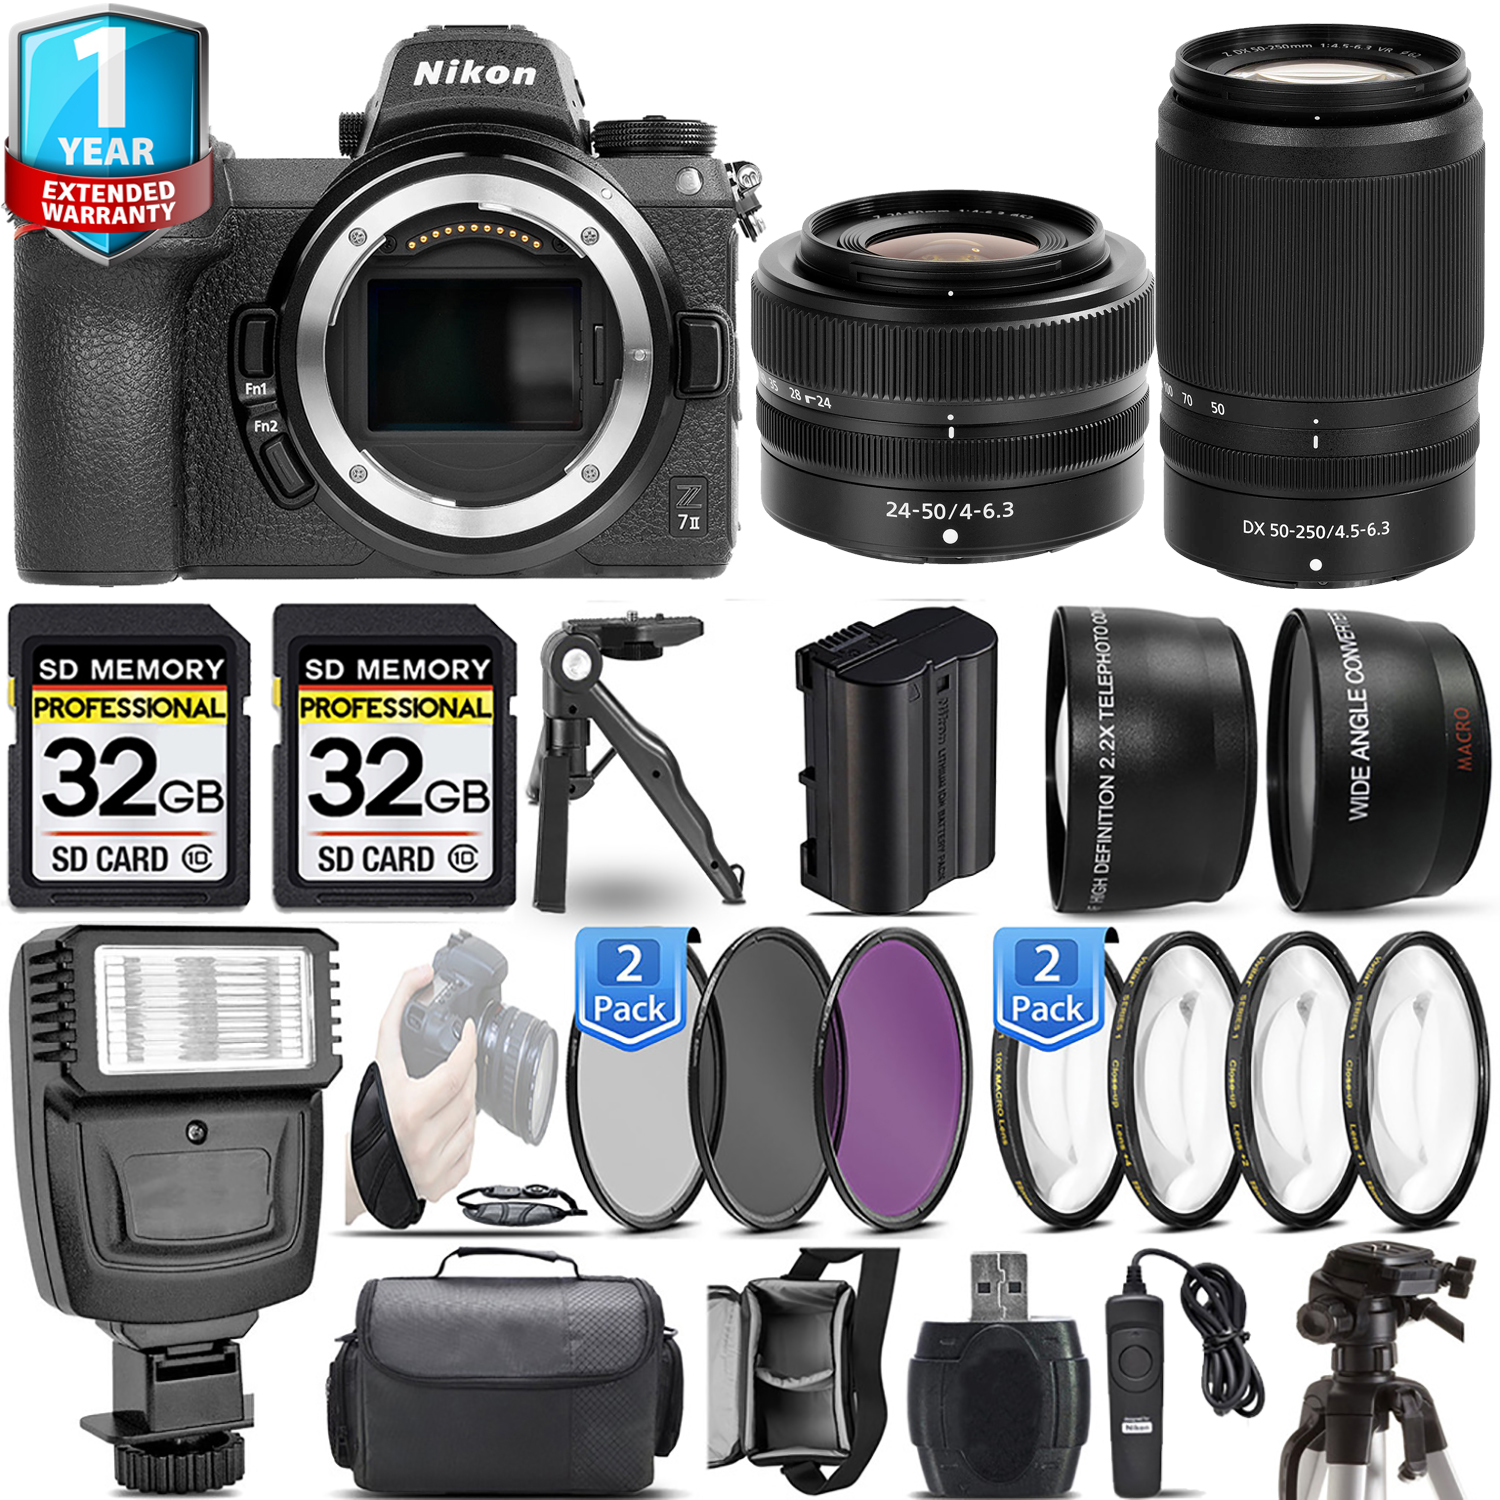 Z7 II Mirrorless Camera + 50-250mm + 24-50mm + 1 Year Extended Warranty + 64GB Basic Kit *FREE SHIPPING*